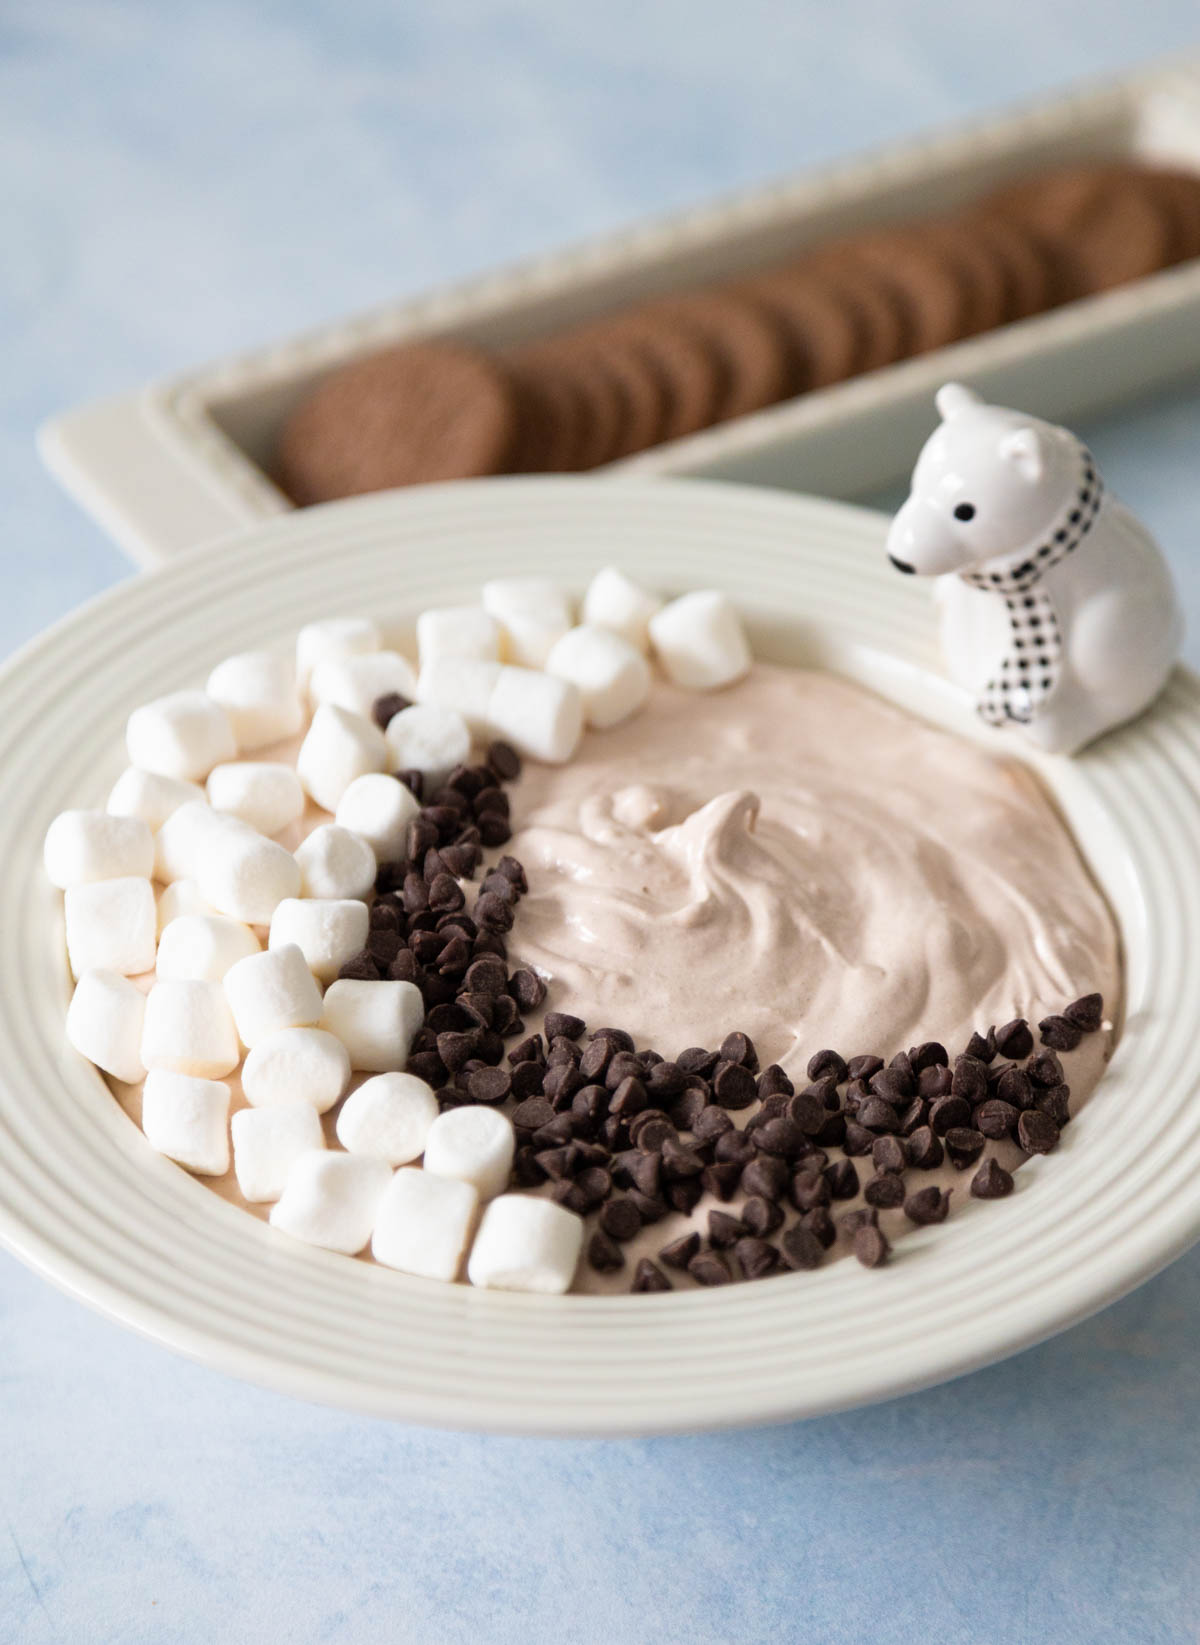 The dip has been garnished with marshmallows and chocolate chips. A platter of chocolate wafer cookies sits next to the bowl.